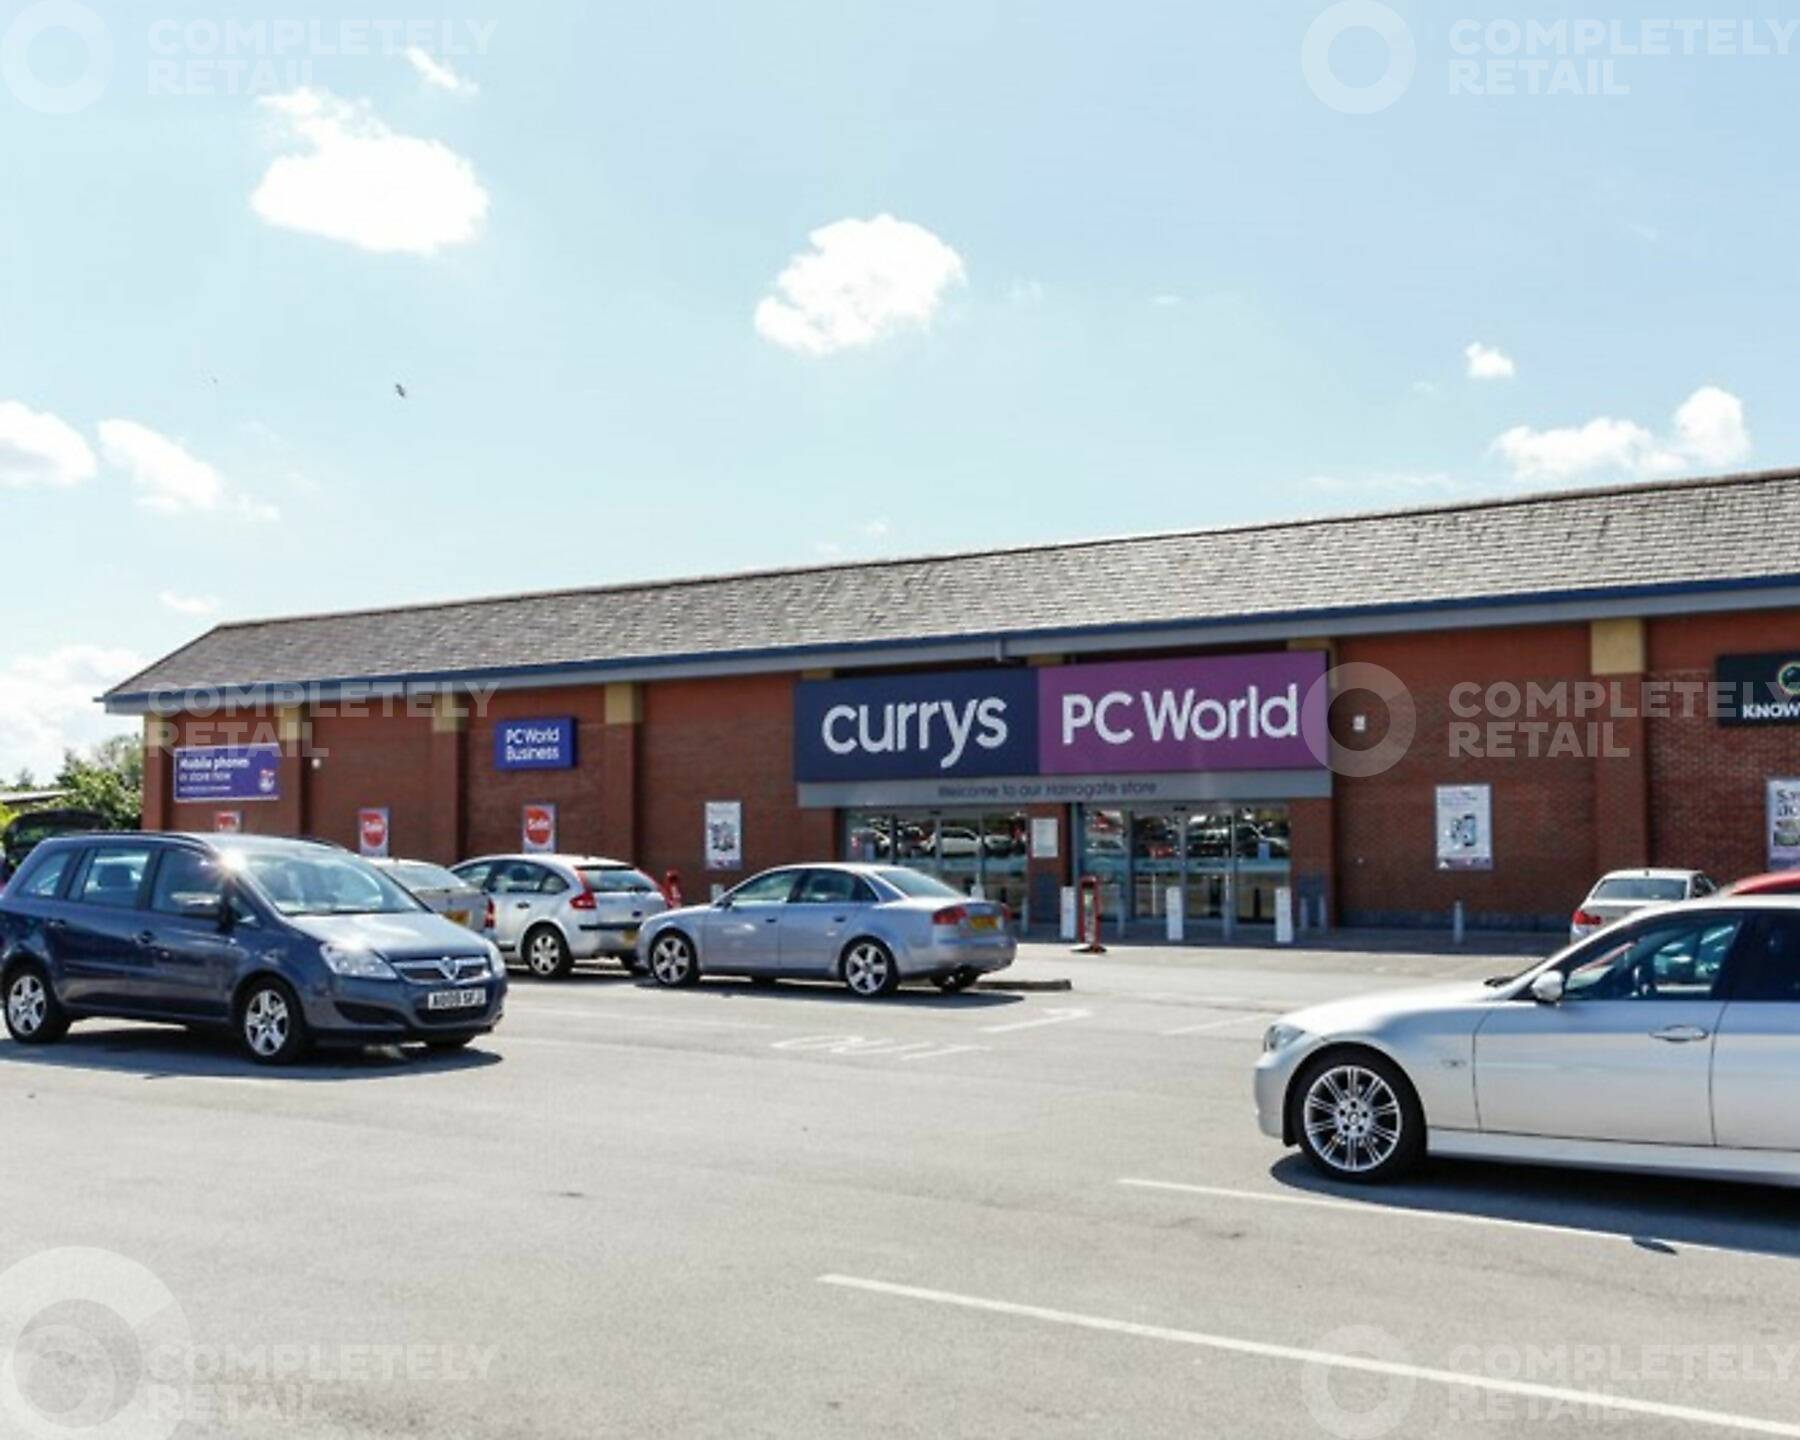 Starbeck Retail Park